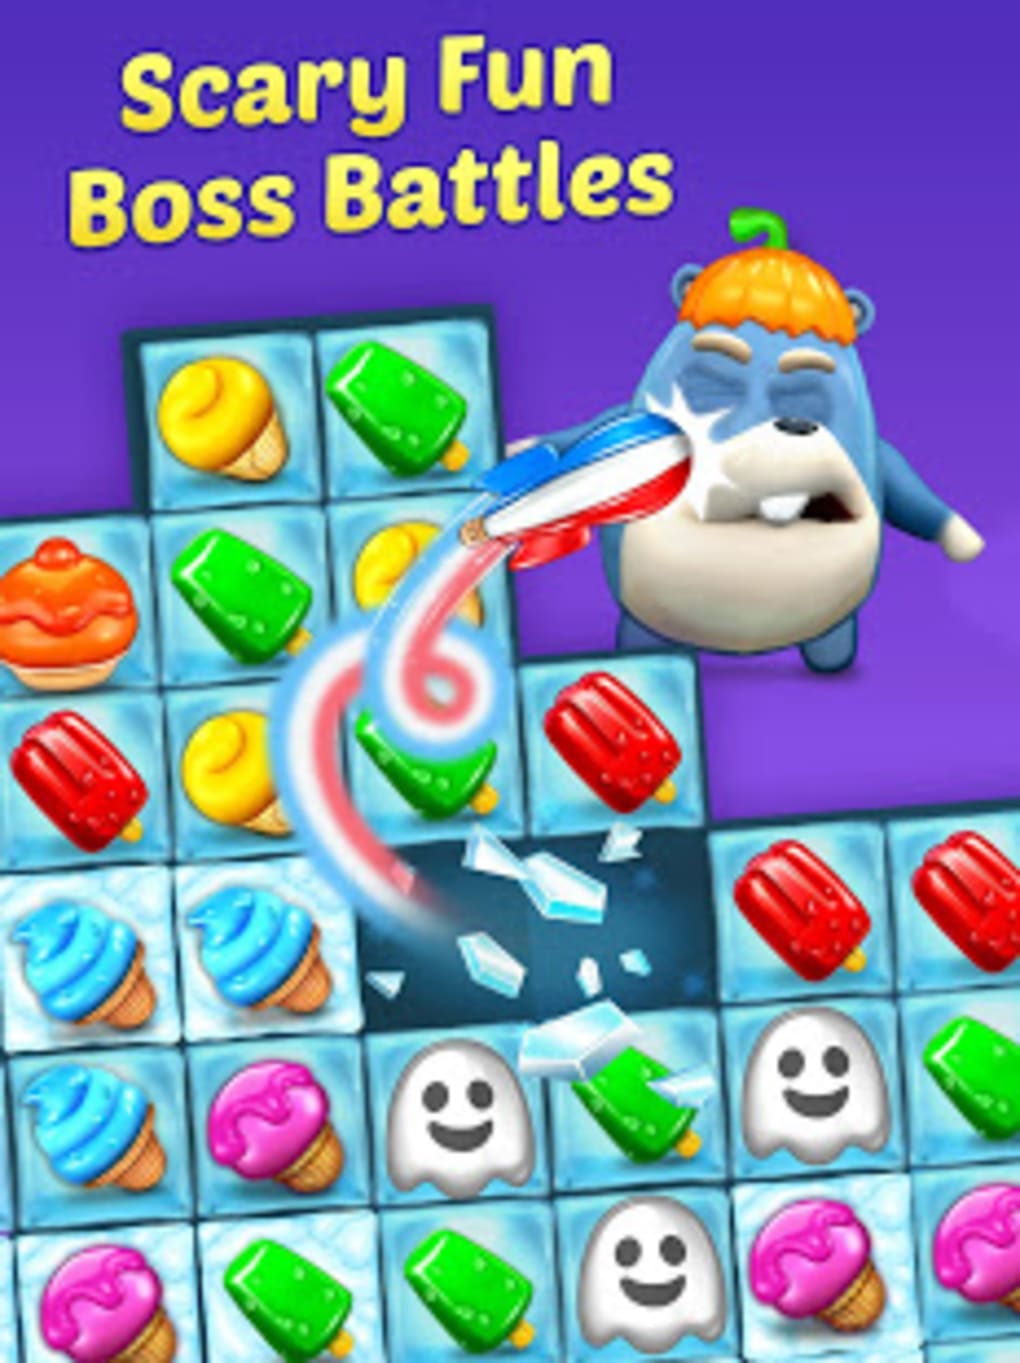 Balloon Paradise - Match 3 Puzzle Game for ios download